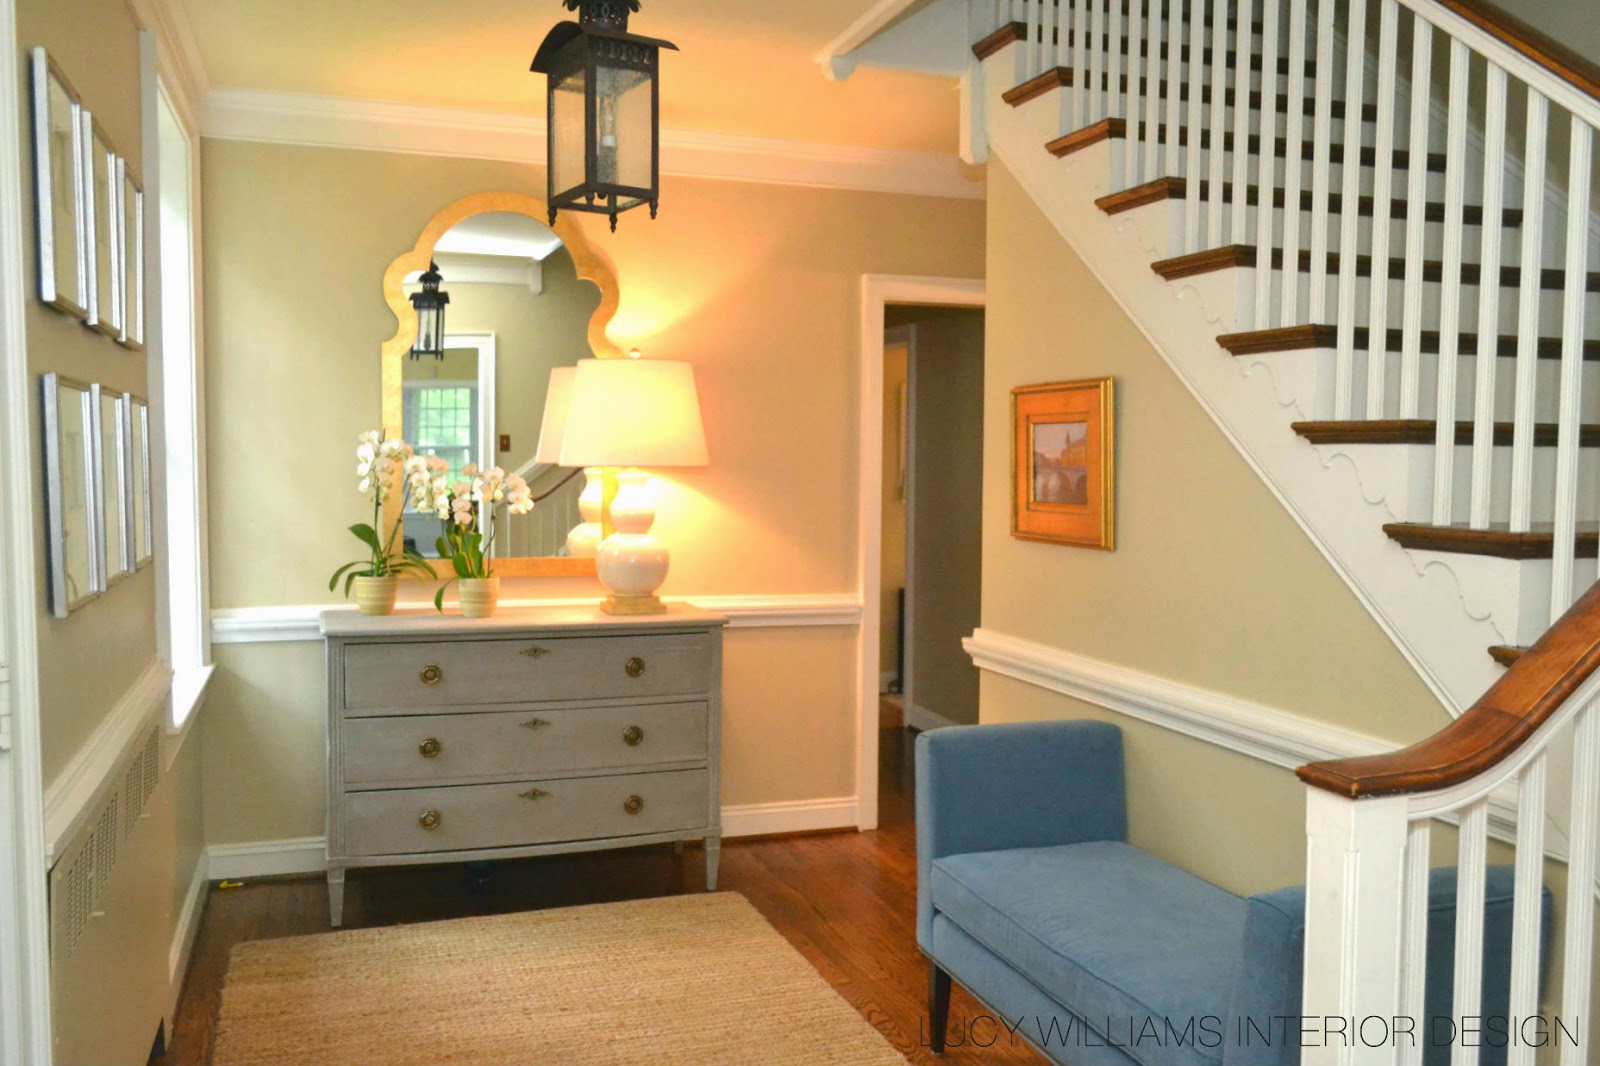 BEFORE AND AFTER NORTH SHORE FOYER Home Design Minimalist Living Room